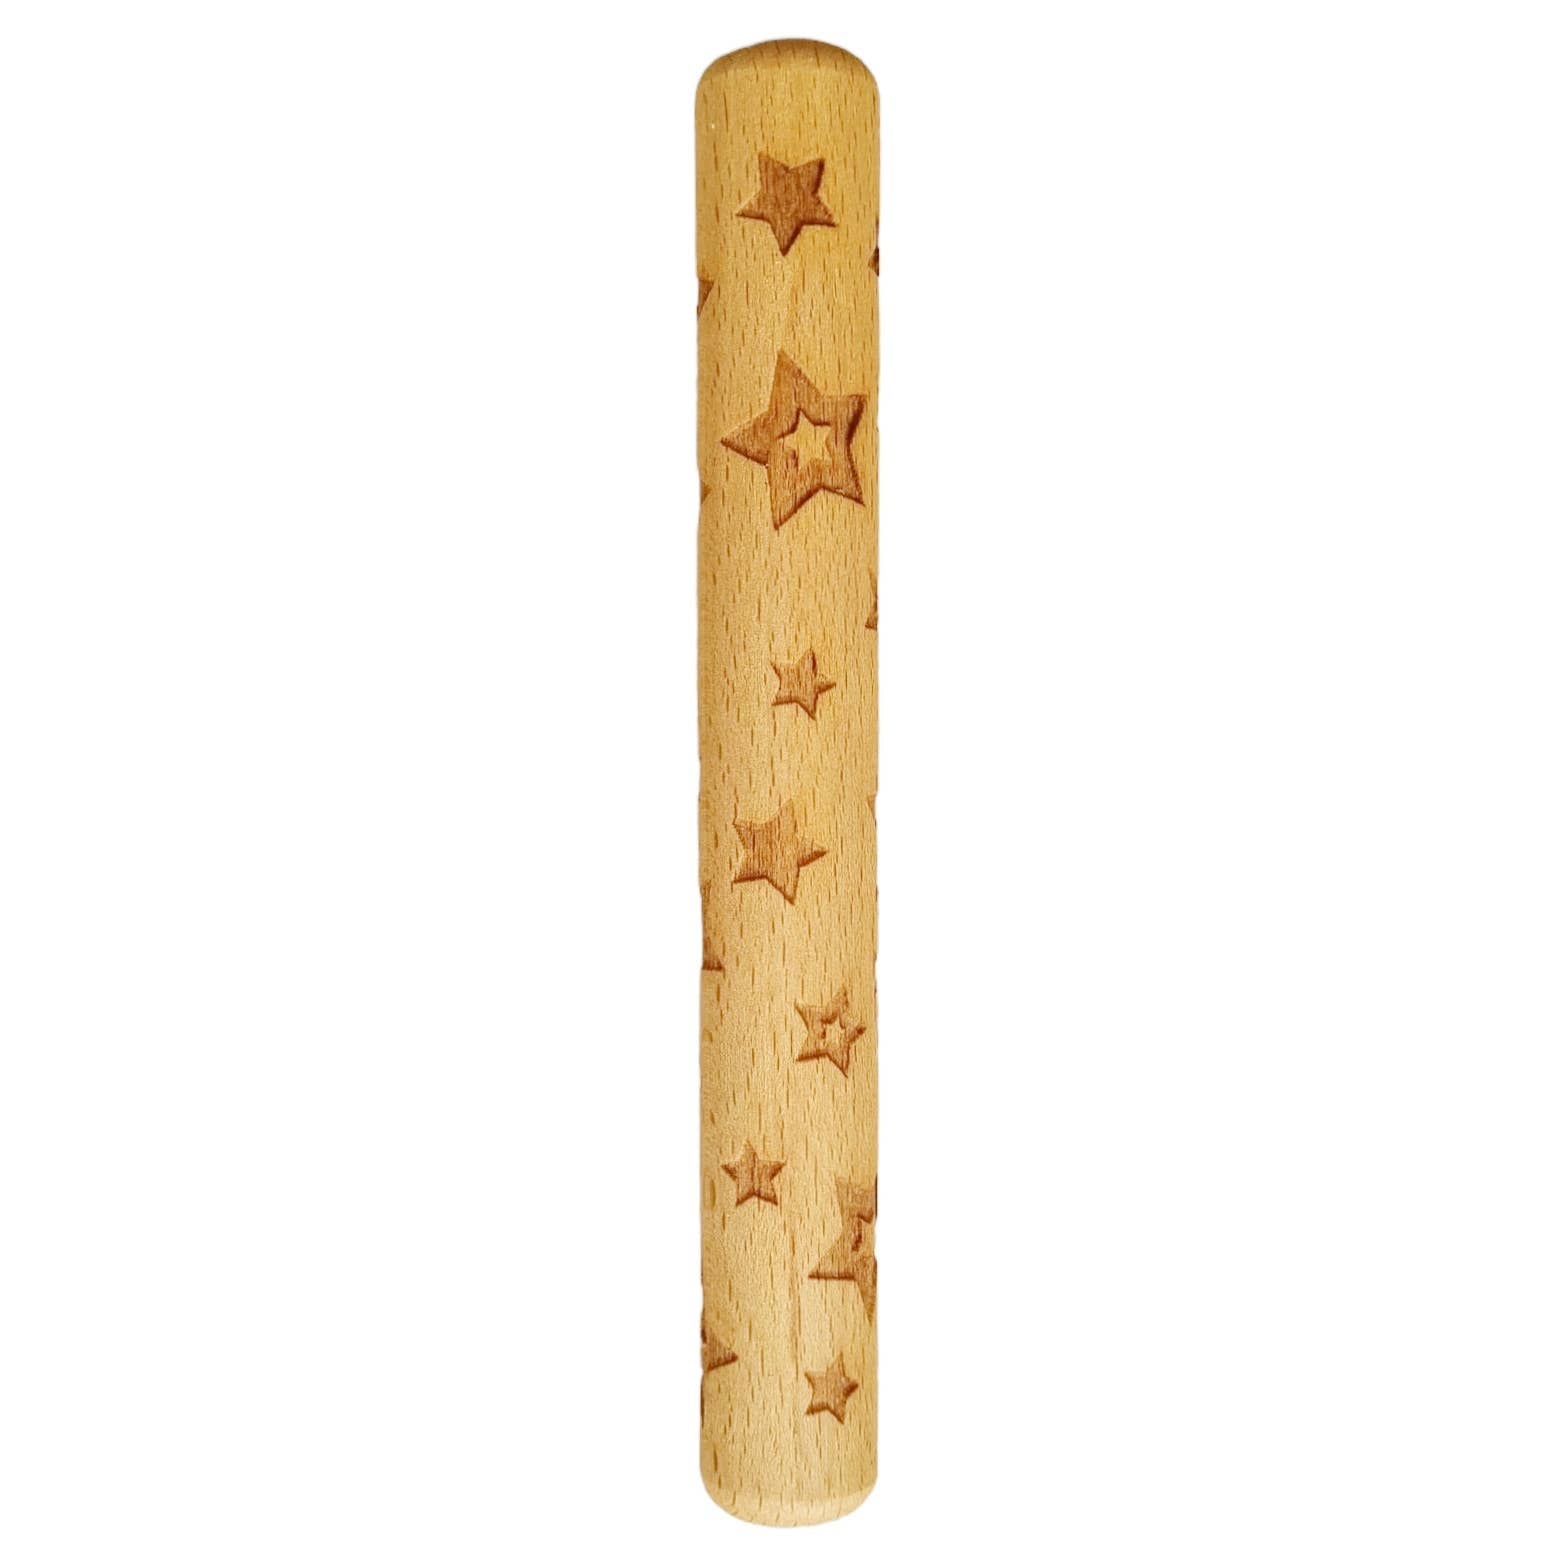 Stars Wooden Roller, Introducing our Stars Wooden Roller.This unique and charming roller is the perfect addition to your child's art and sensory playtime. Made from high-quality wood, this Stars Wooden Roller is designed to create texture and relief as your little ones roll out their clay creations. The Stars Wooden Roller features a fun star pattern, perfect for playful and imaginative minds. The rollers are 16 cm long and 2 cm in diameter The rollers are made of beech wood. If clay/dough remains in the ro